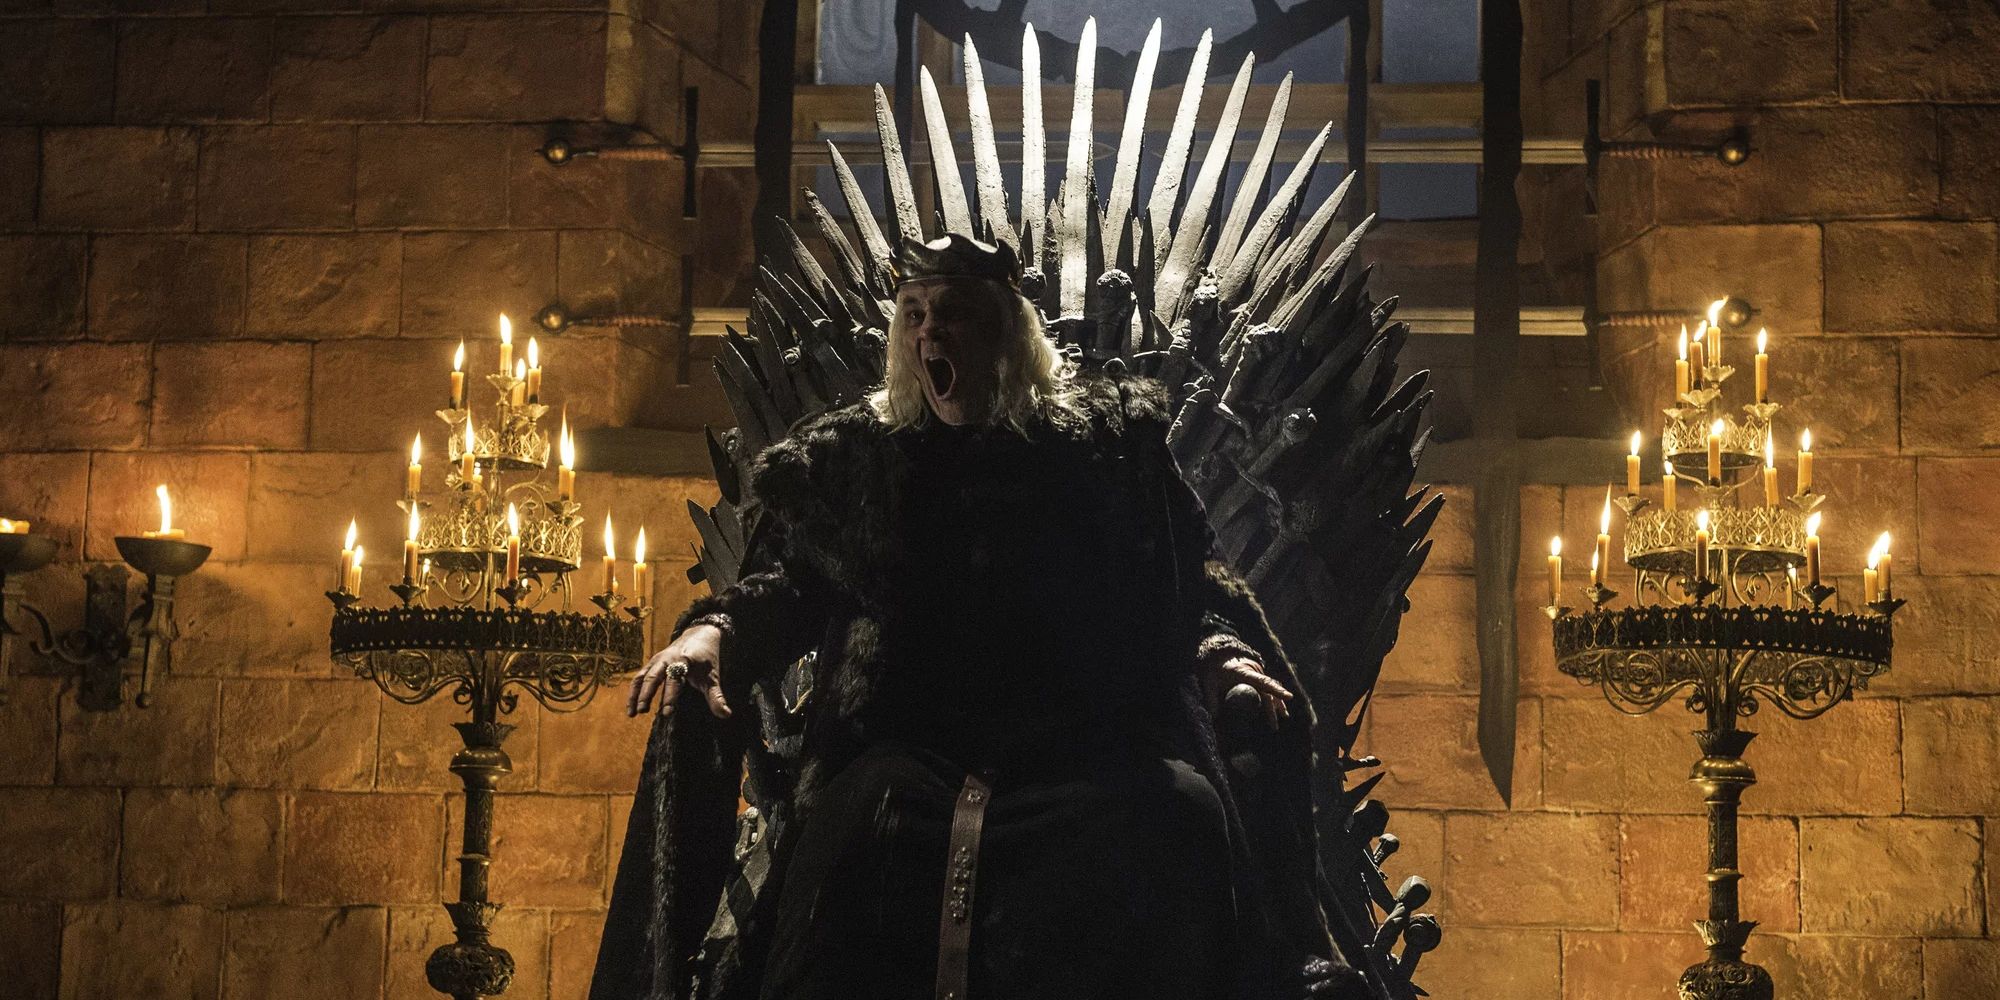 The Mad King appears in Bran's vision in Season 6 of Game of Thrones.